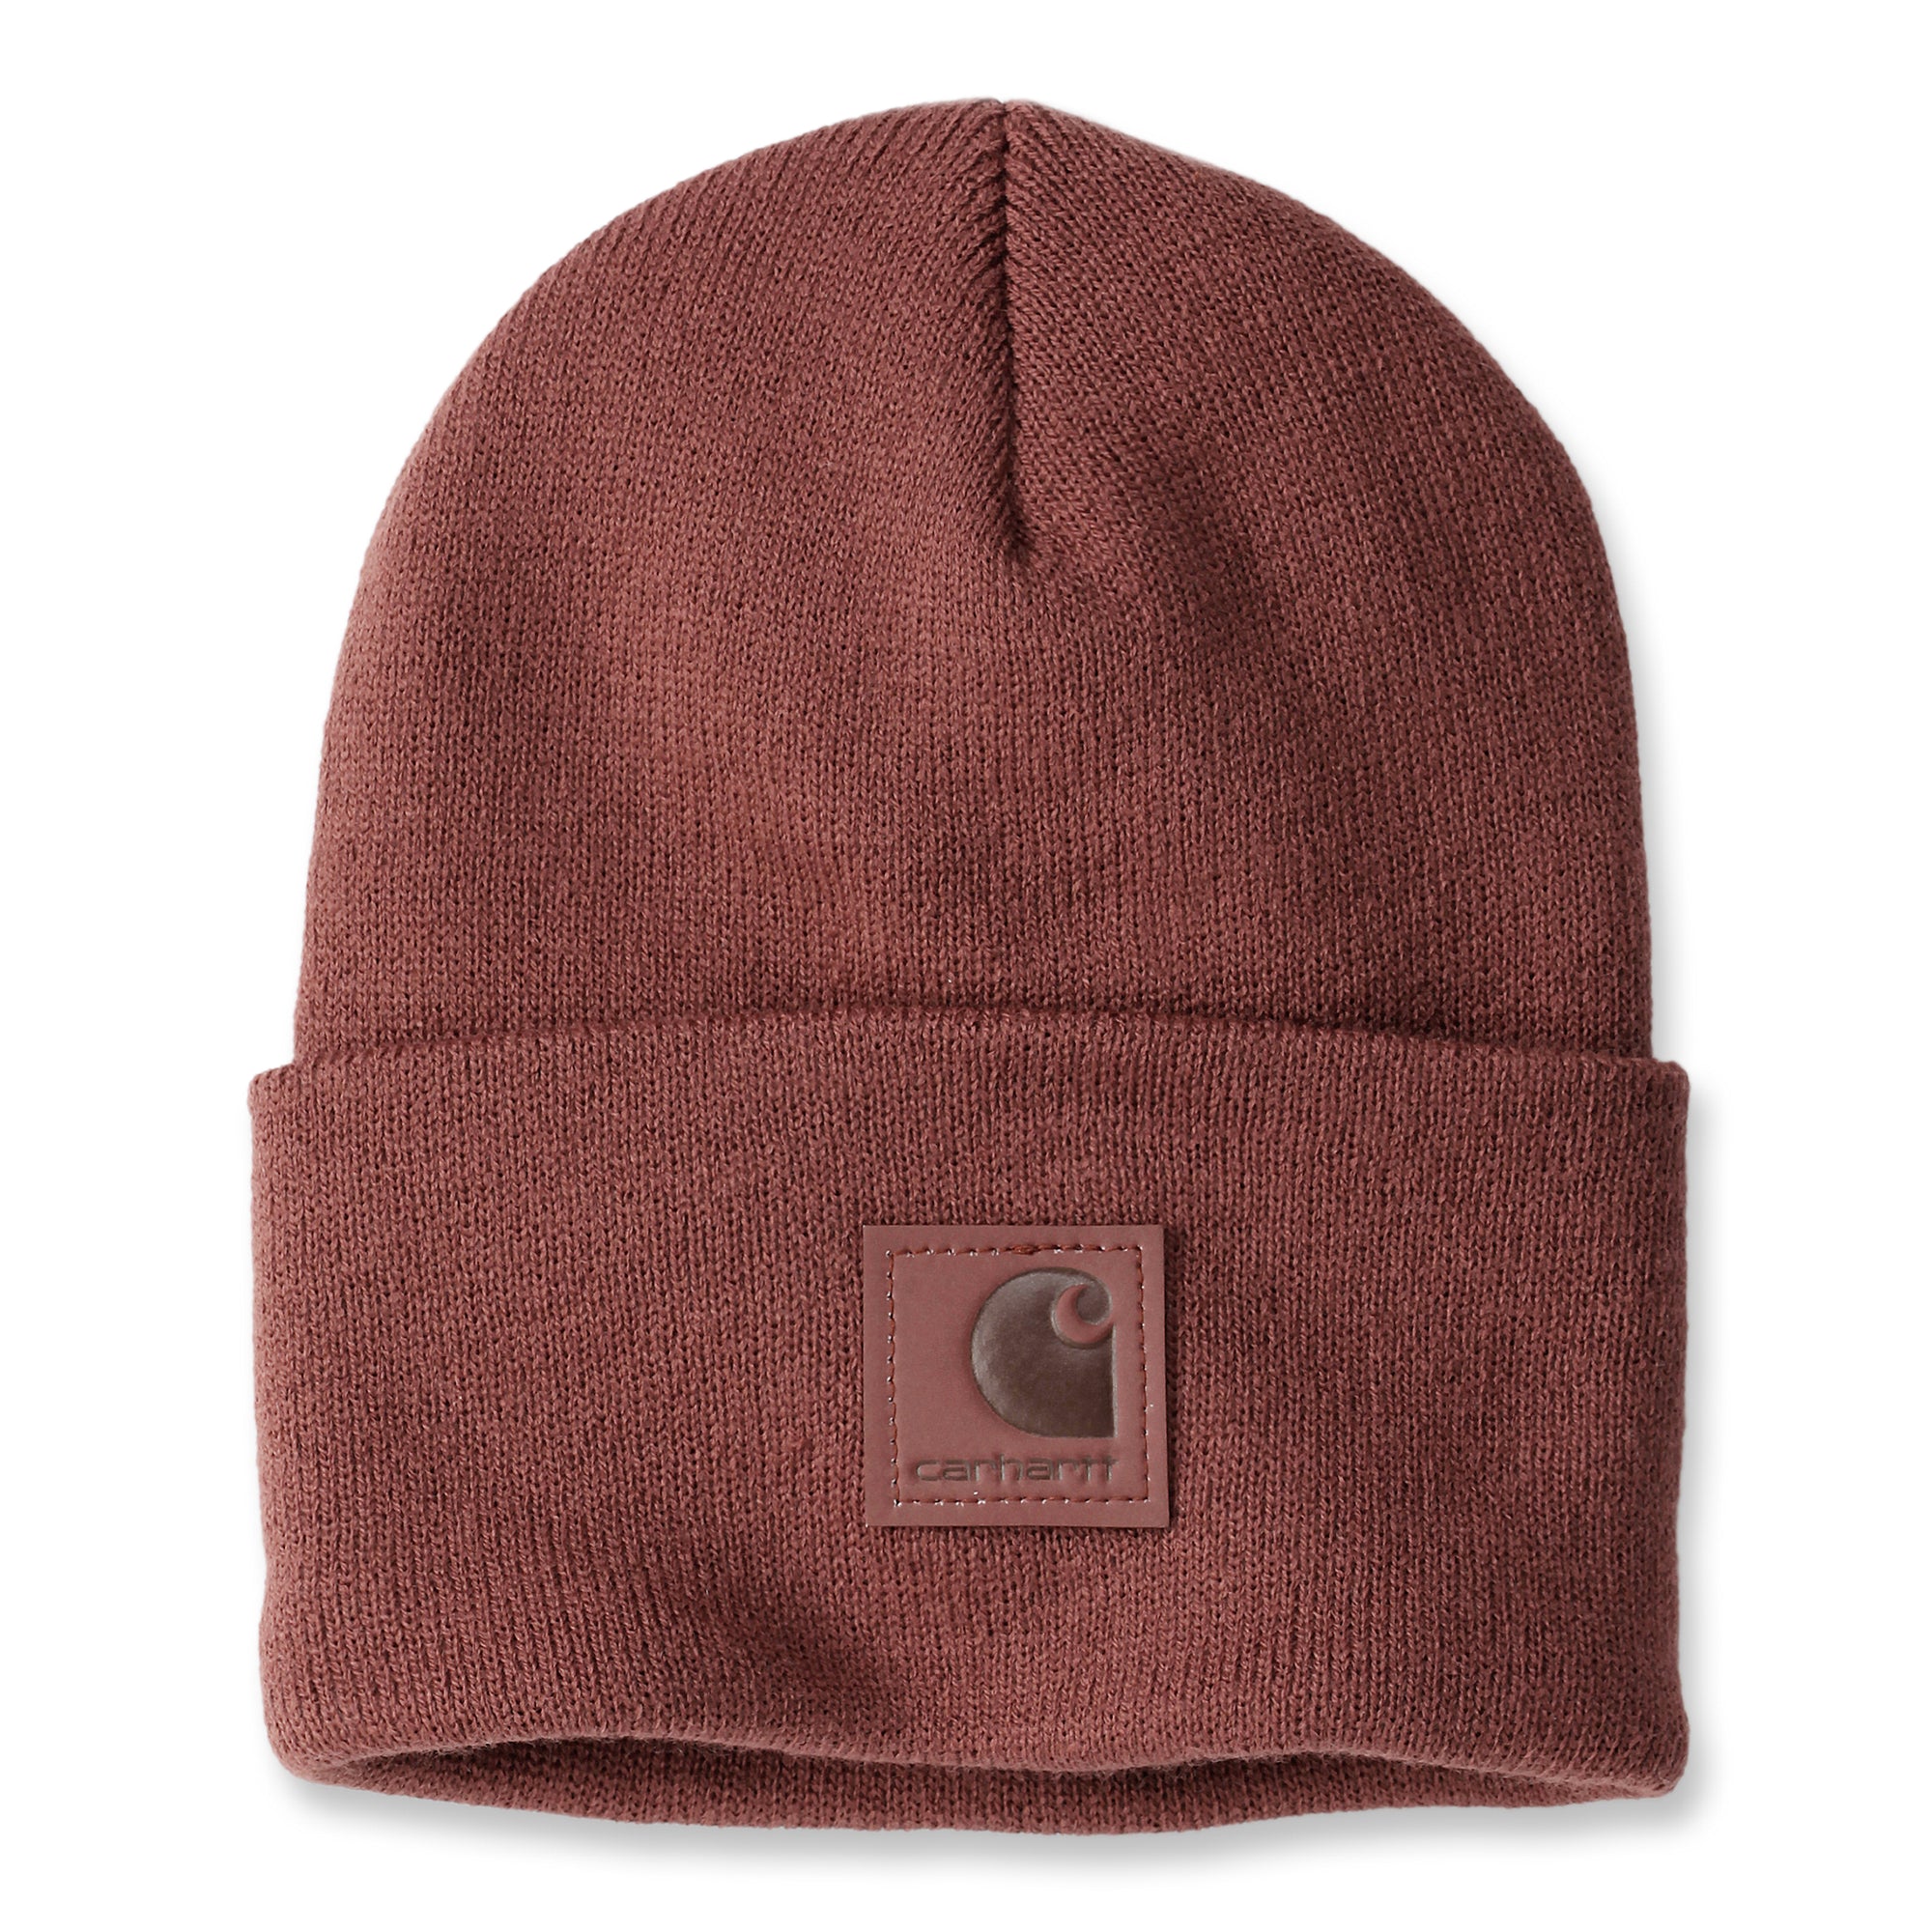 Carhartt Black Label A18 pipo, sable